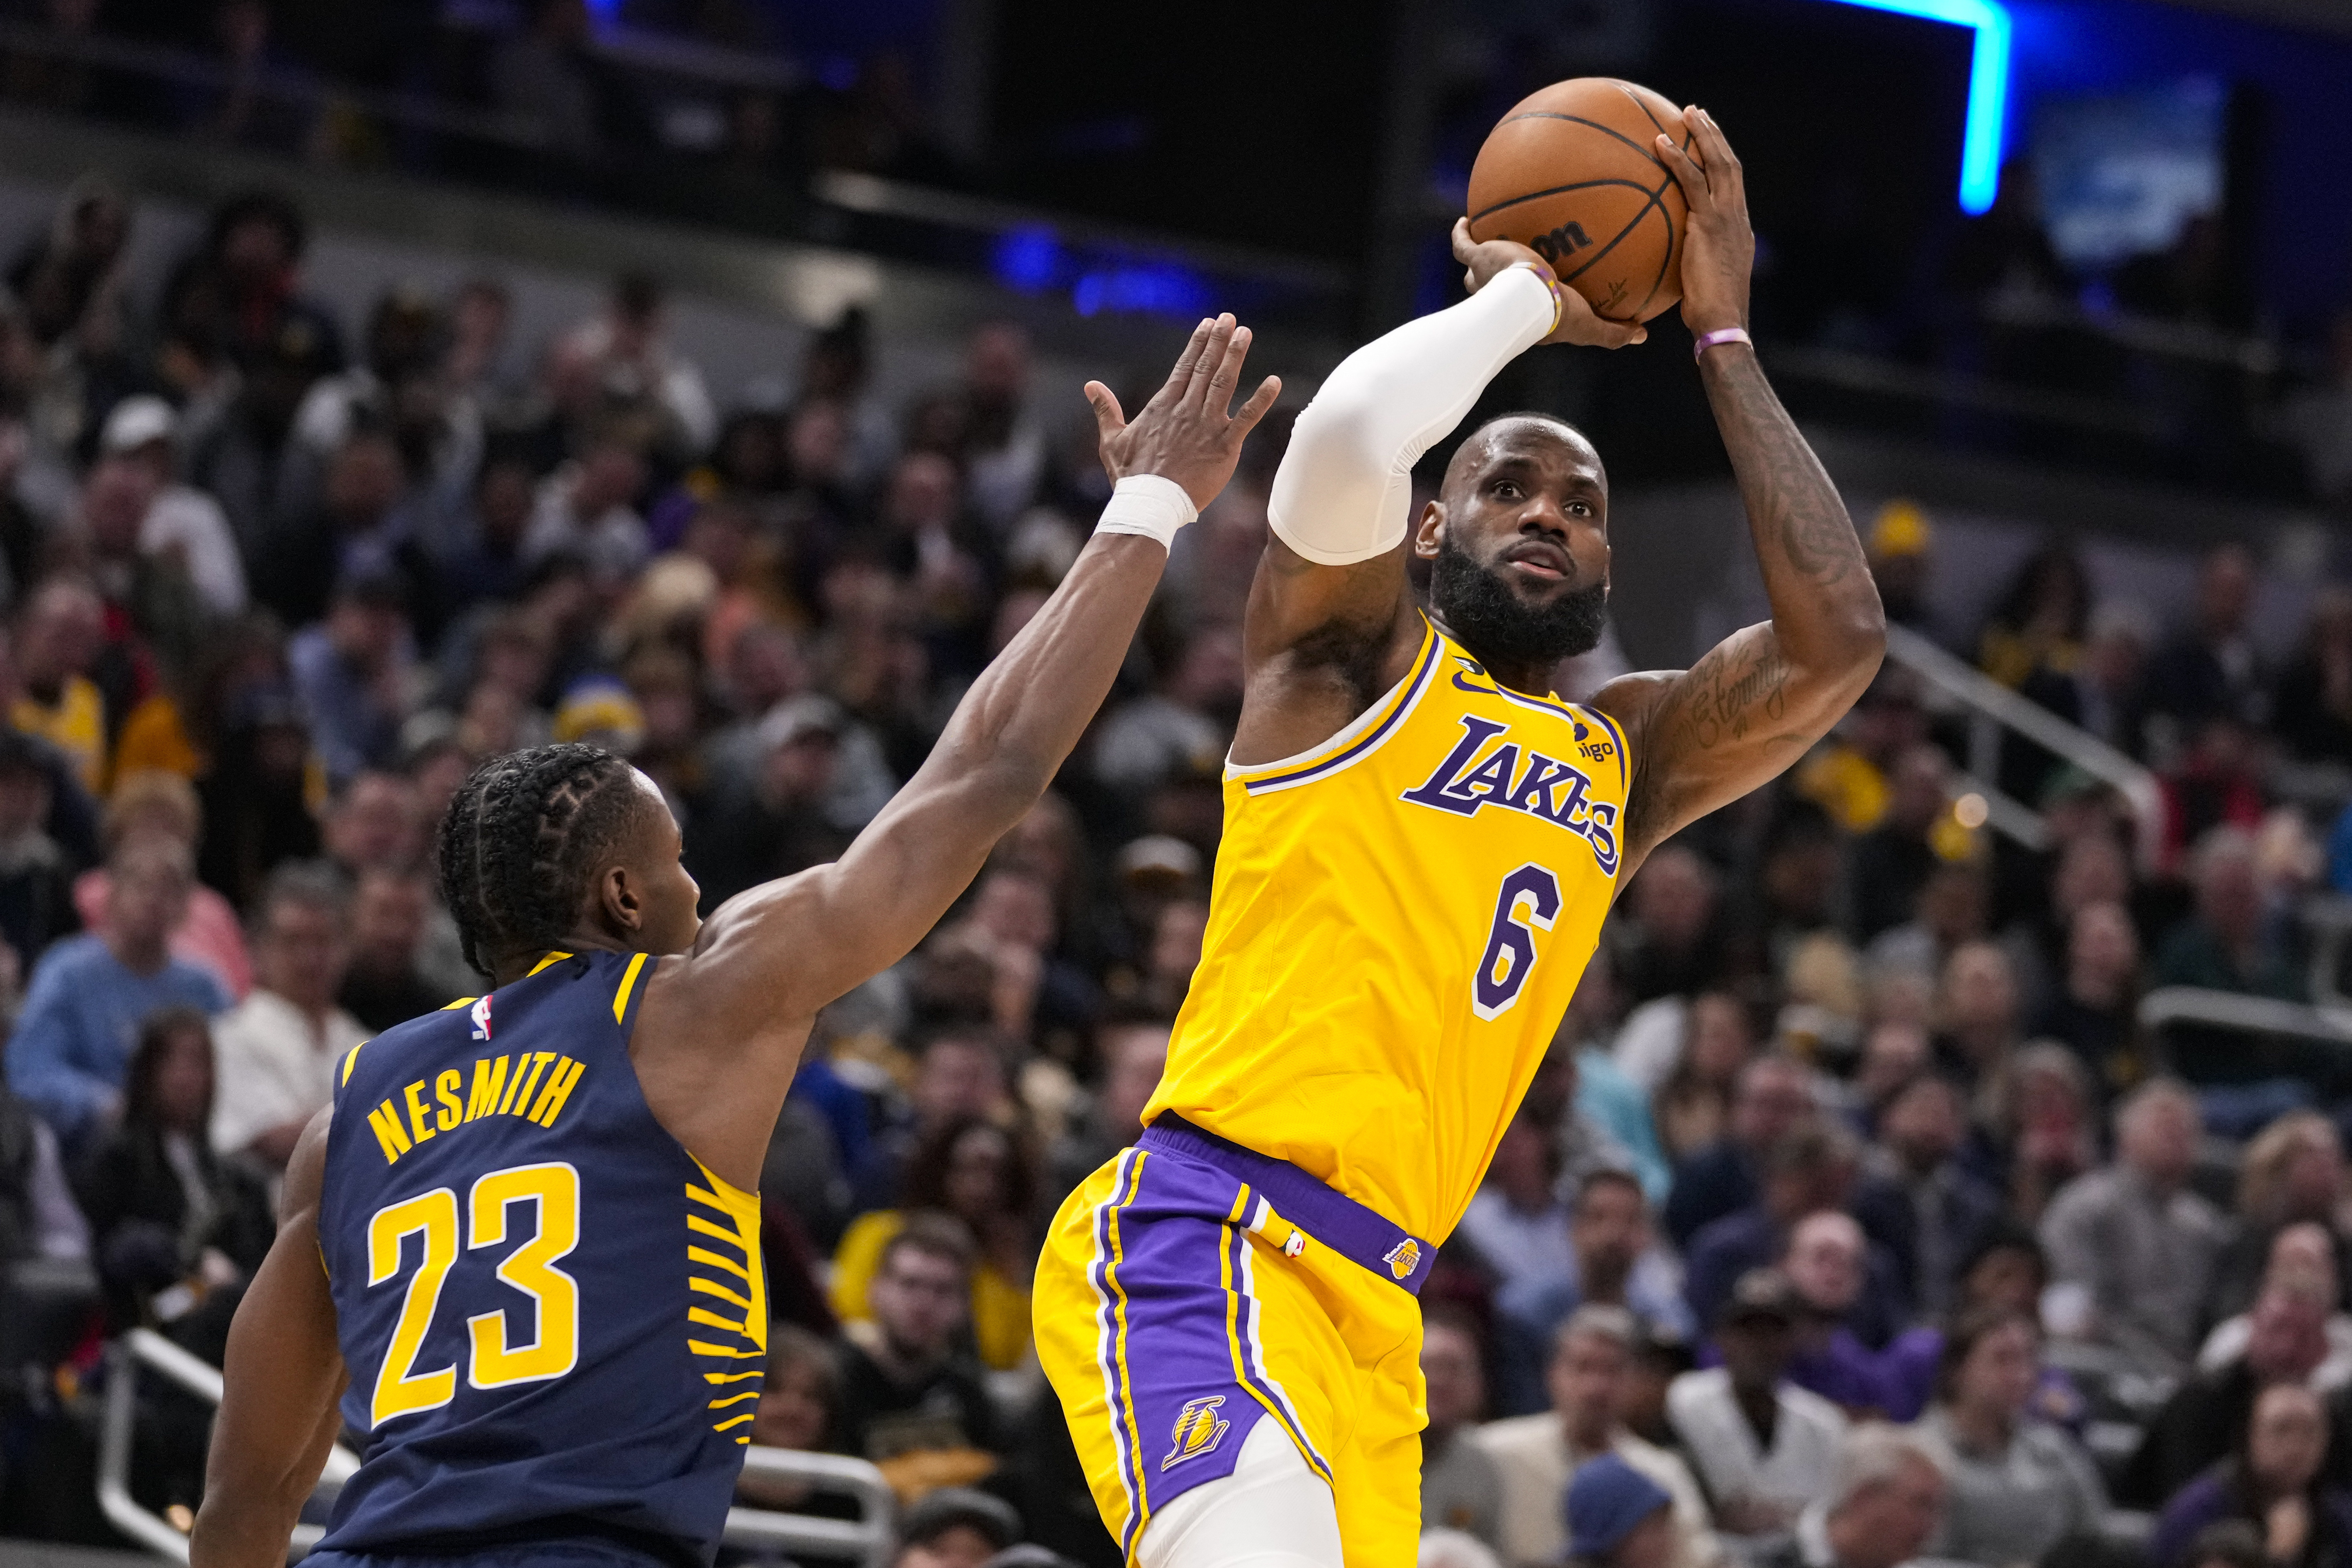 As James nears record, Tuesdays Lakers game moved to TNT